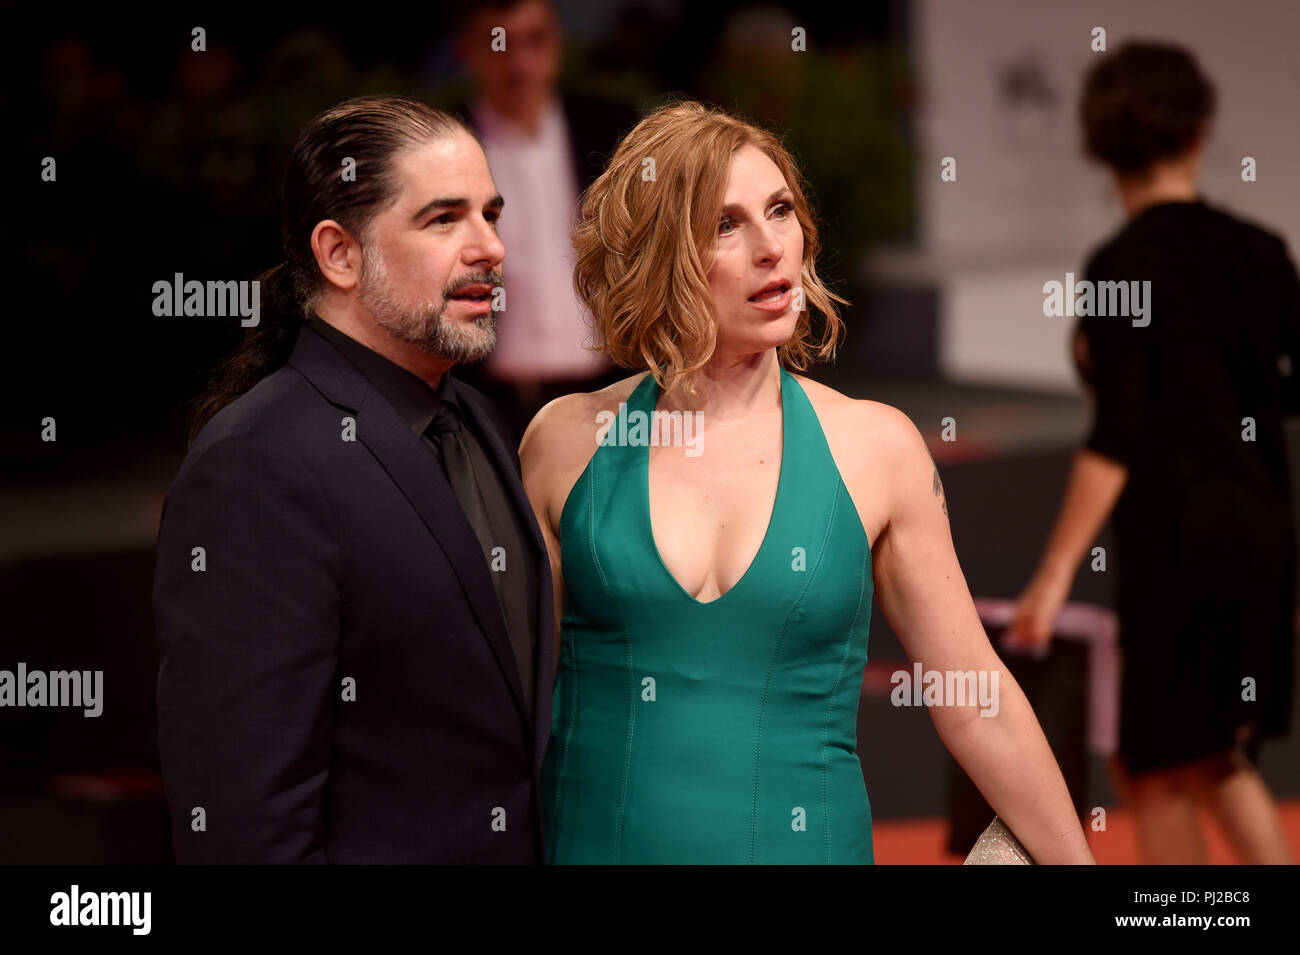 Venice, Italy. 3rd Sept 2018. The film director S. Craig Zahler and his  company can be seen on the red carpet of the film screening "Dragged Across  Concrete" at the Venice Film